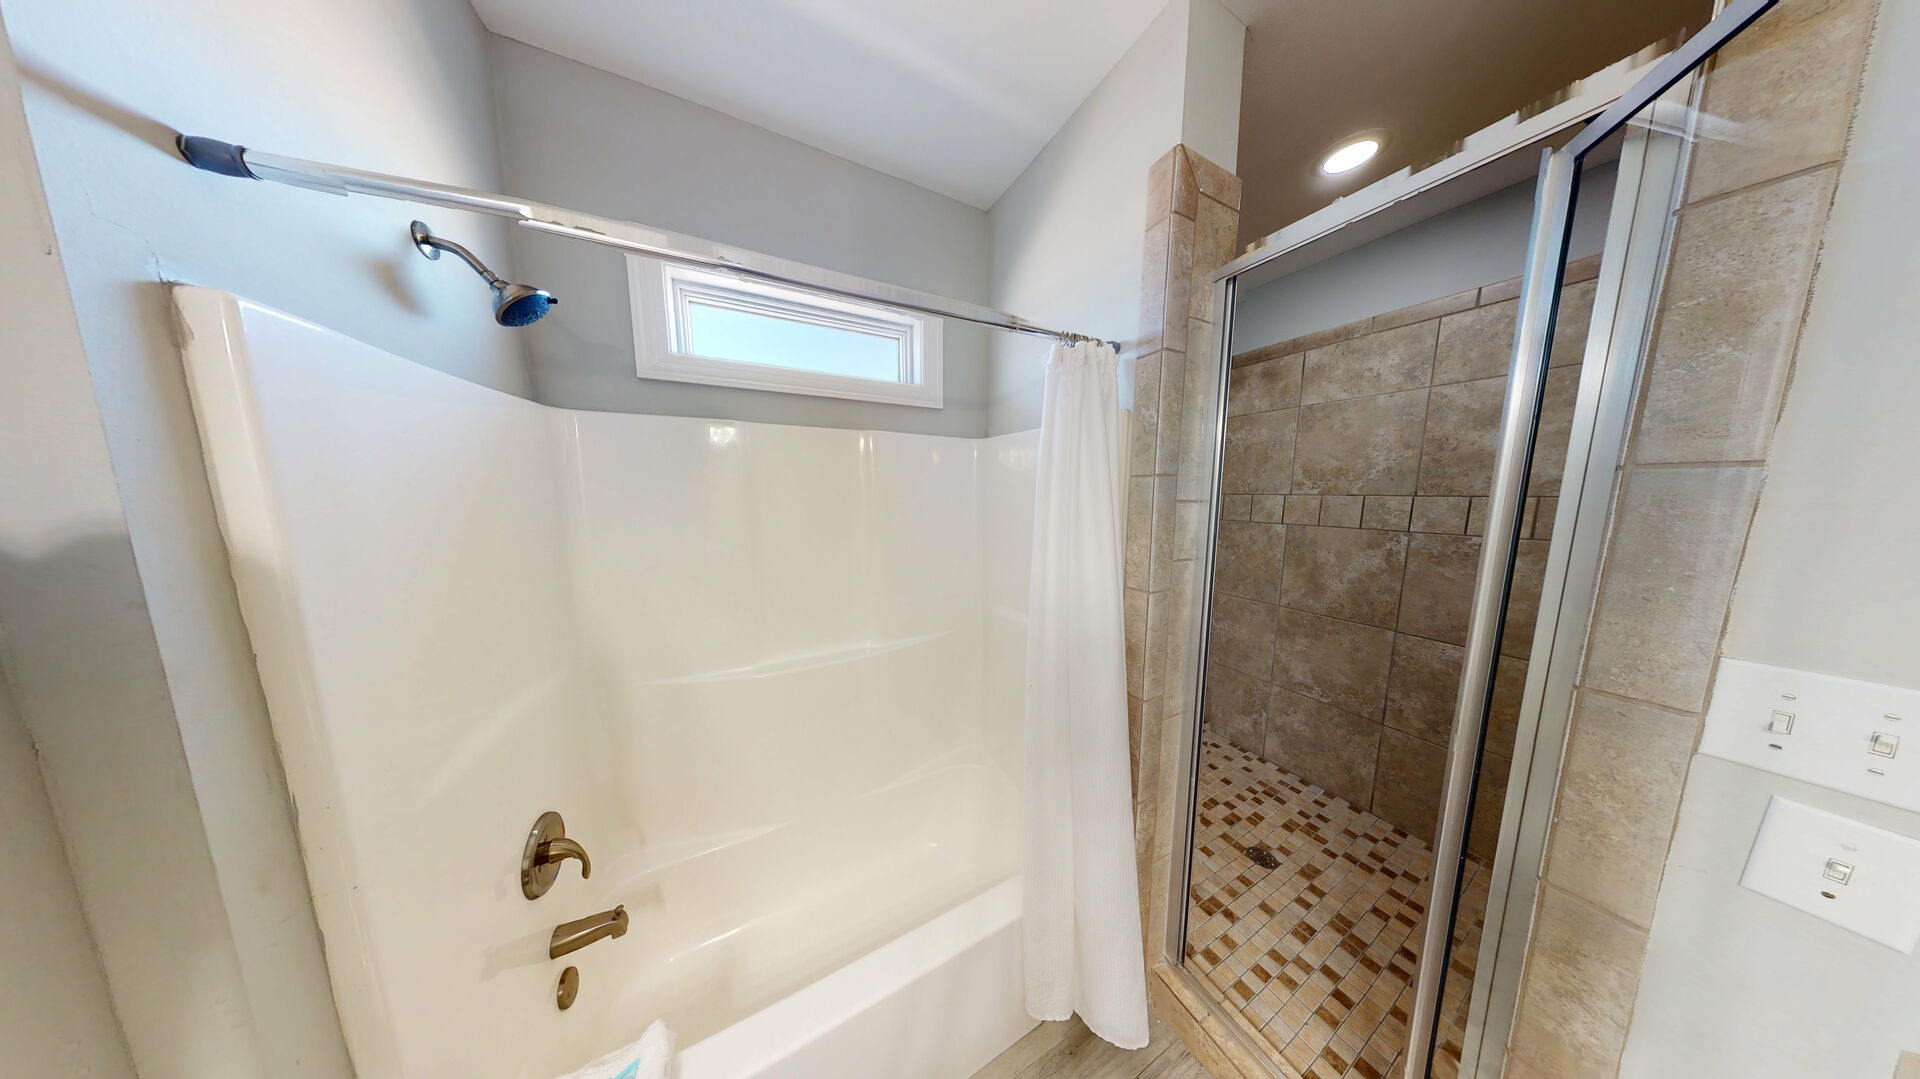 The 3rd floor bathroom has a tub shower combo and a walk-in shower